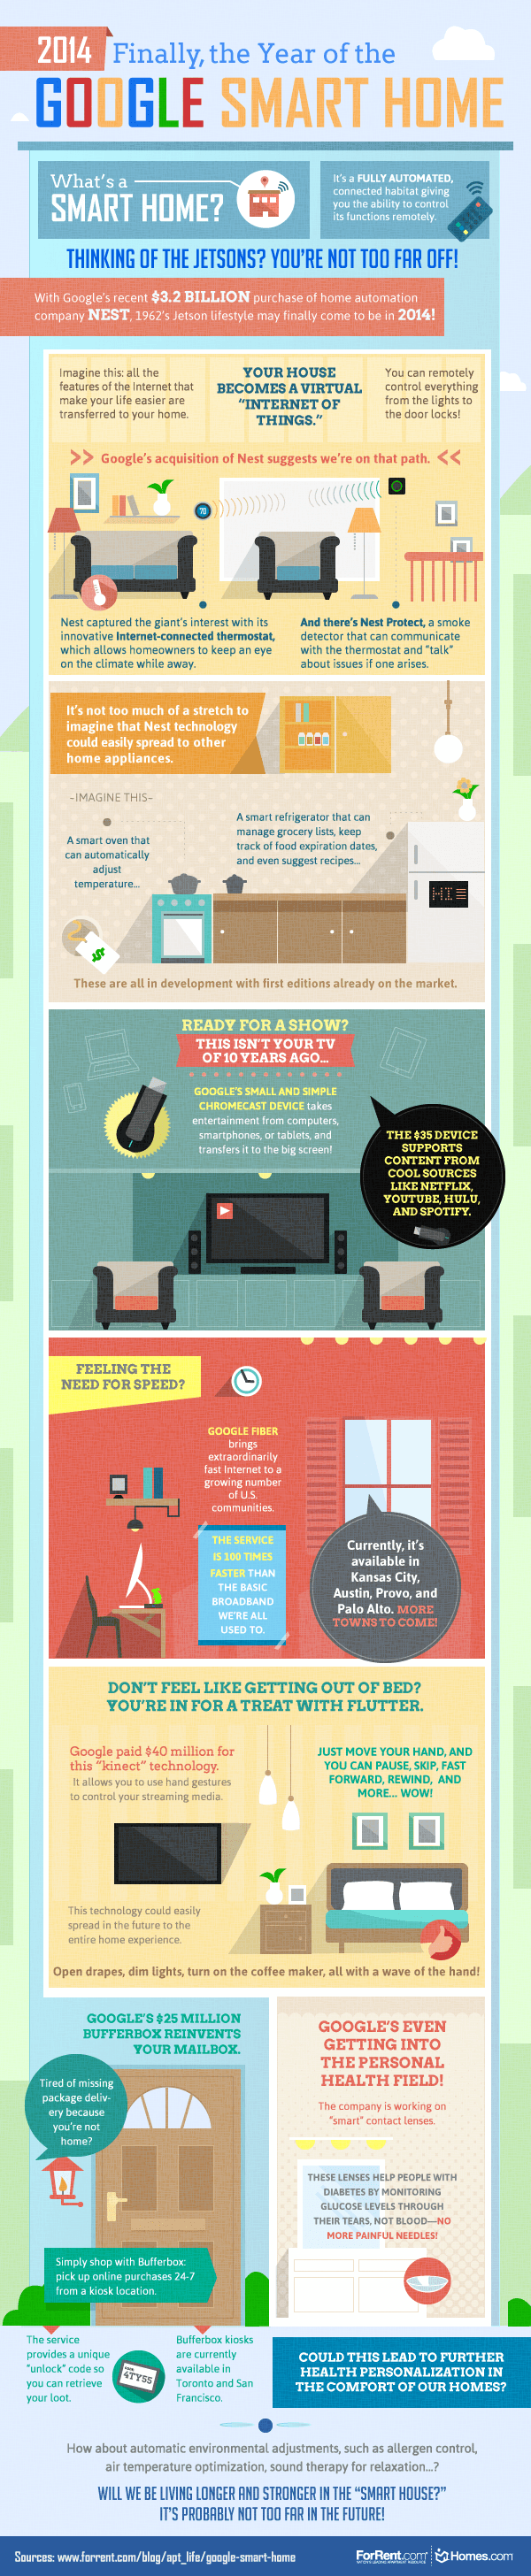 2014: the google smart home infographic